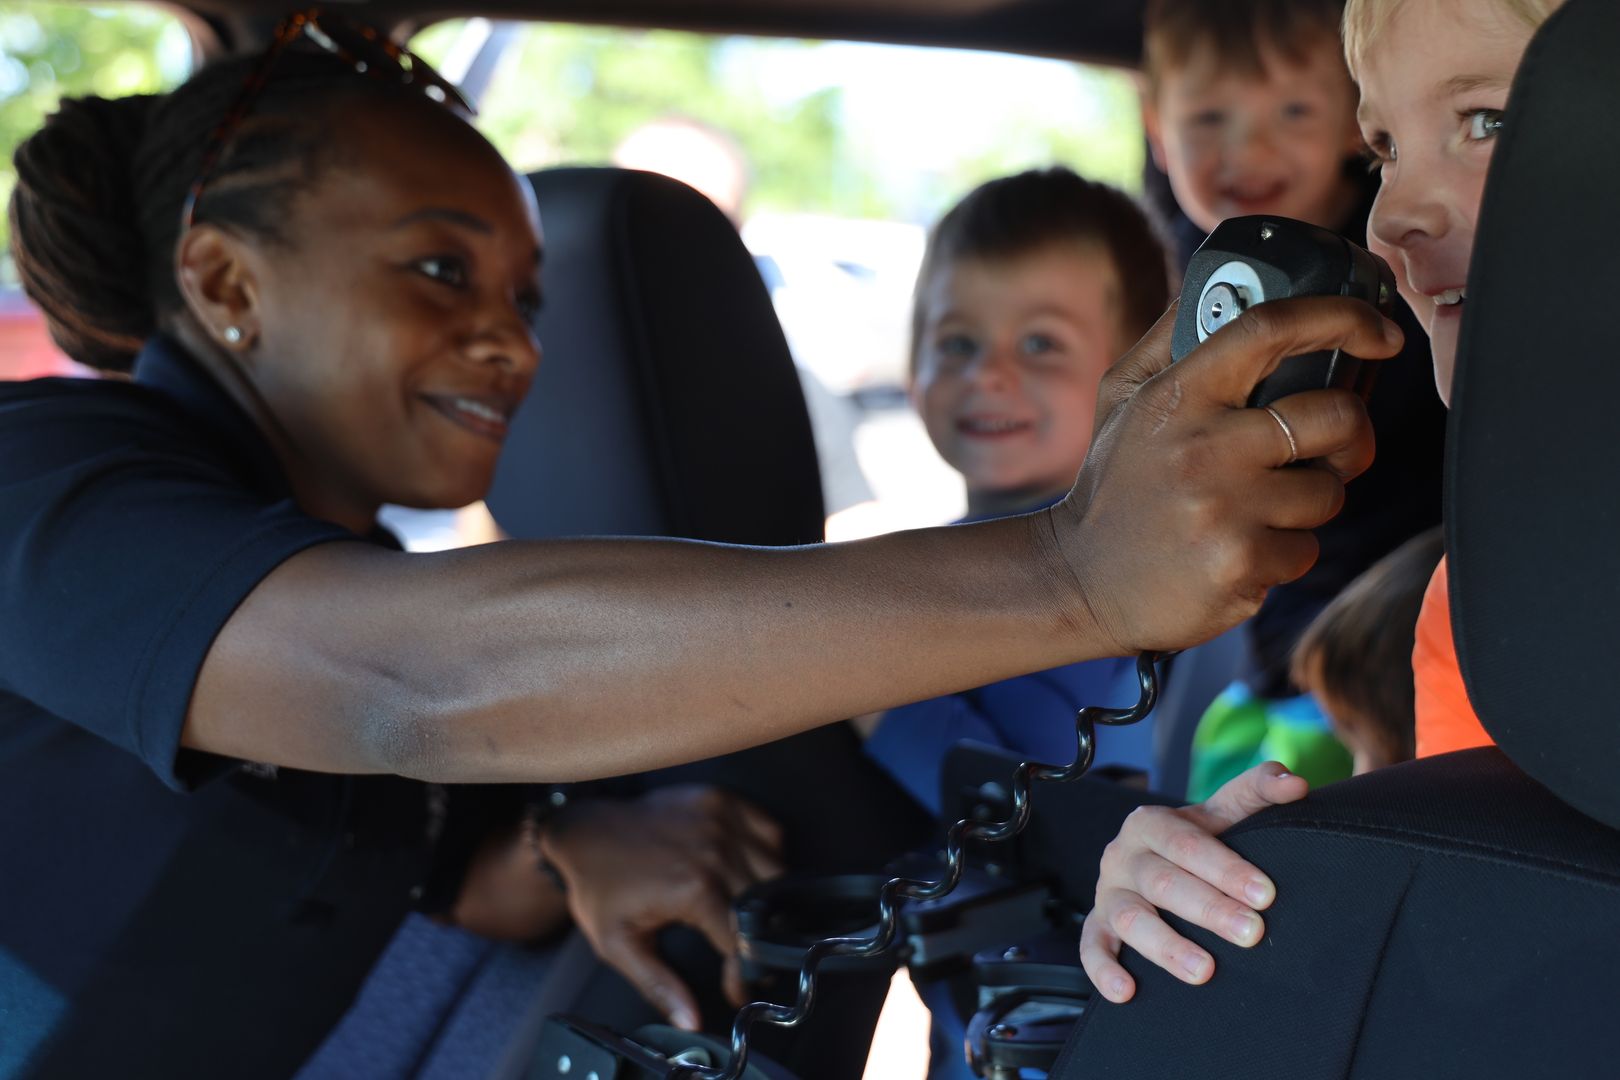 A Deputy is interacting with children and showing them how to use the radio on a patrol car.